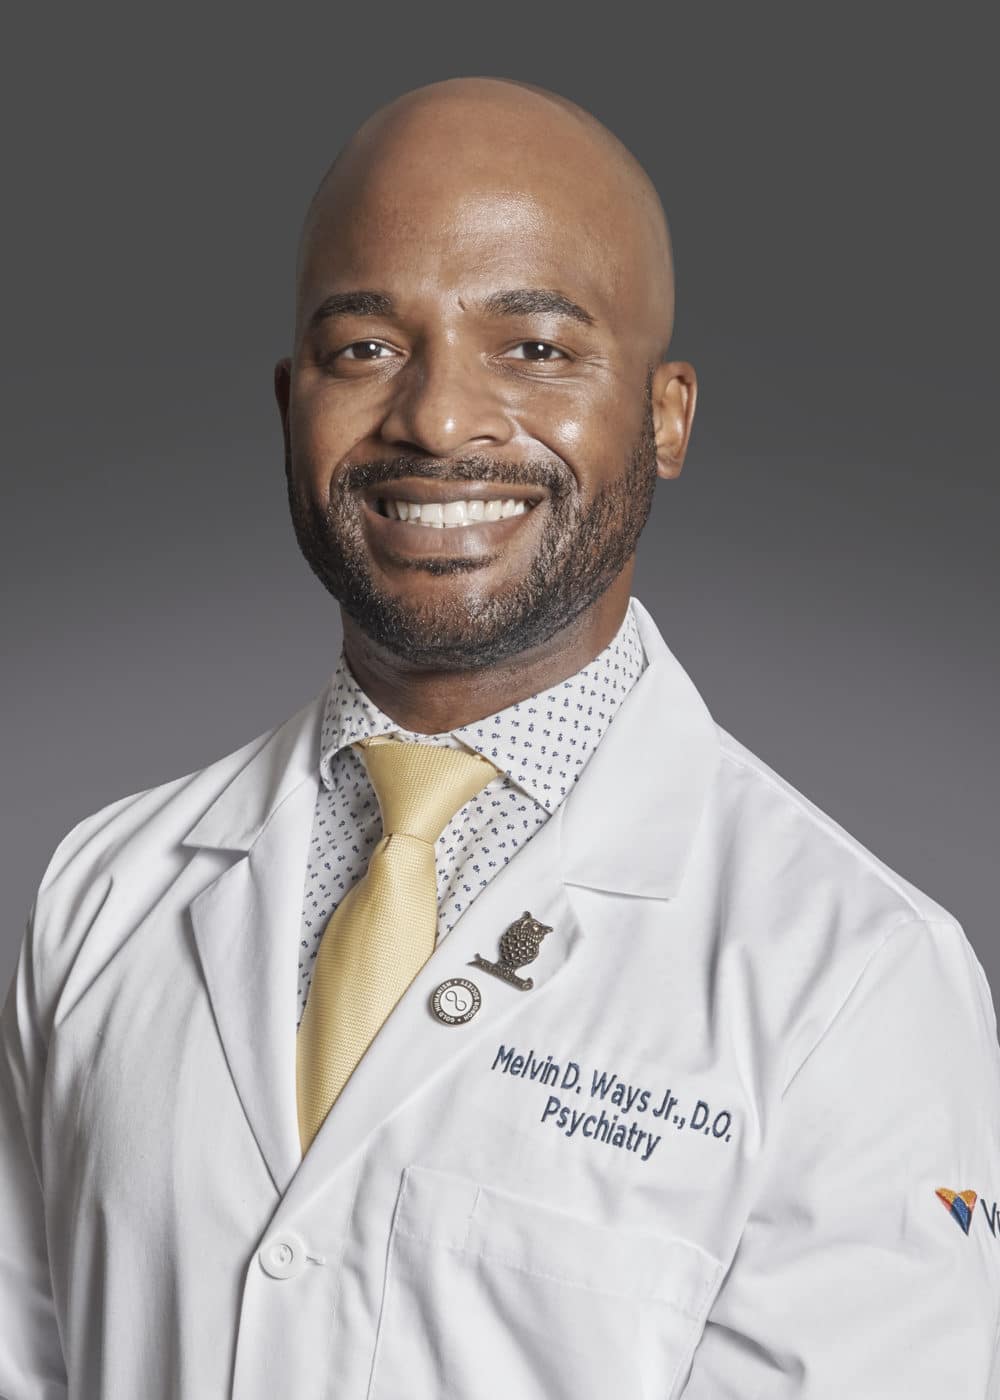 Photo of Dr. Melvin Ways wearing his doctor's white coat and a yellow tie.